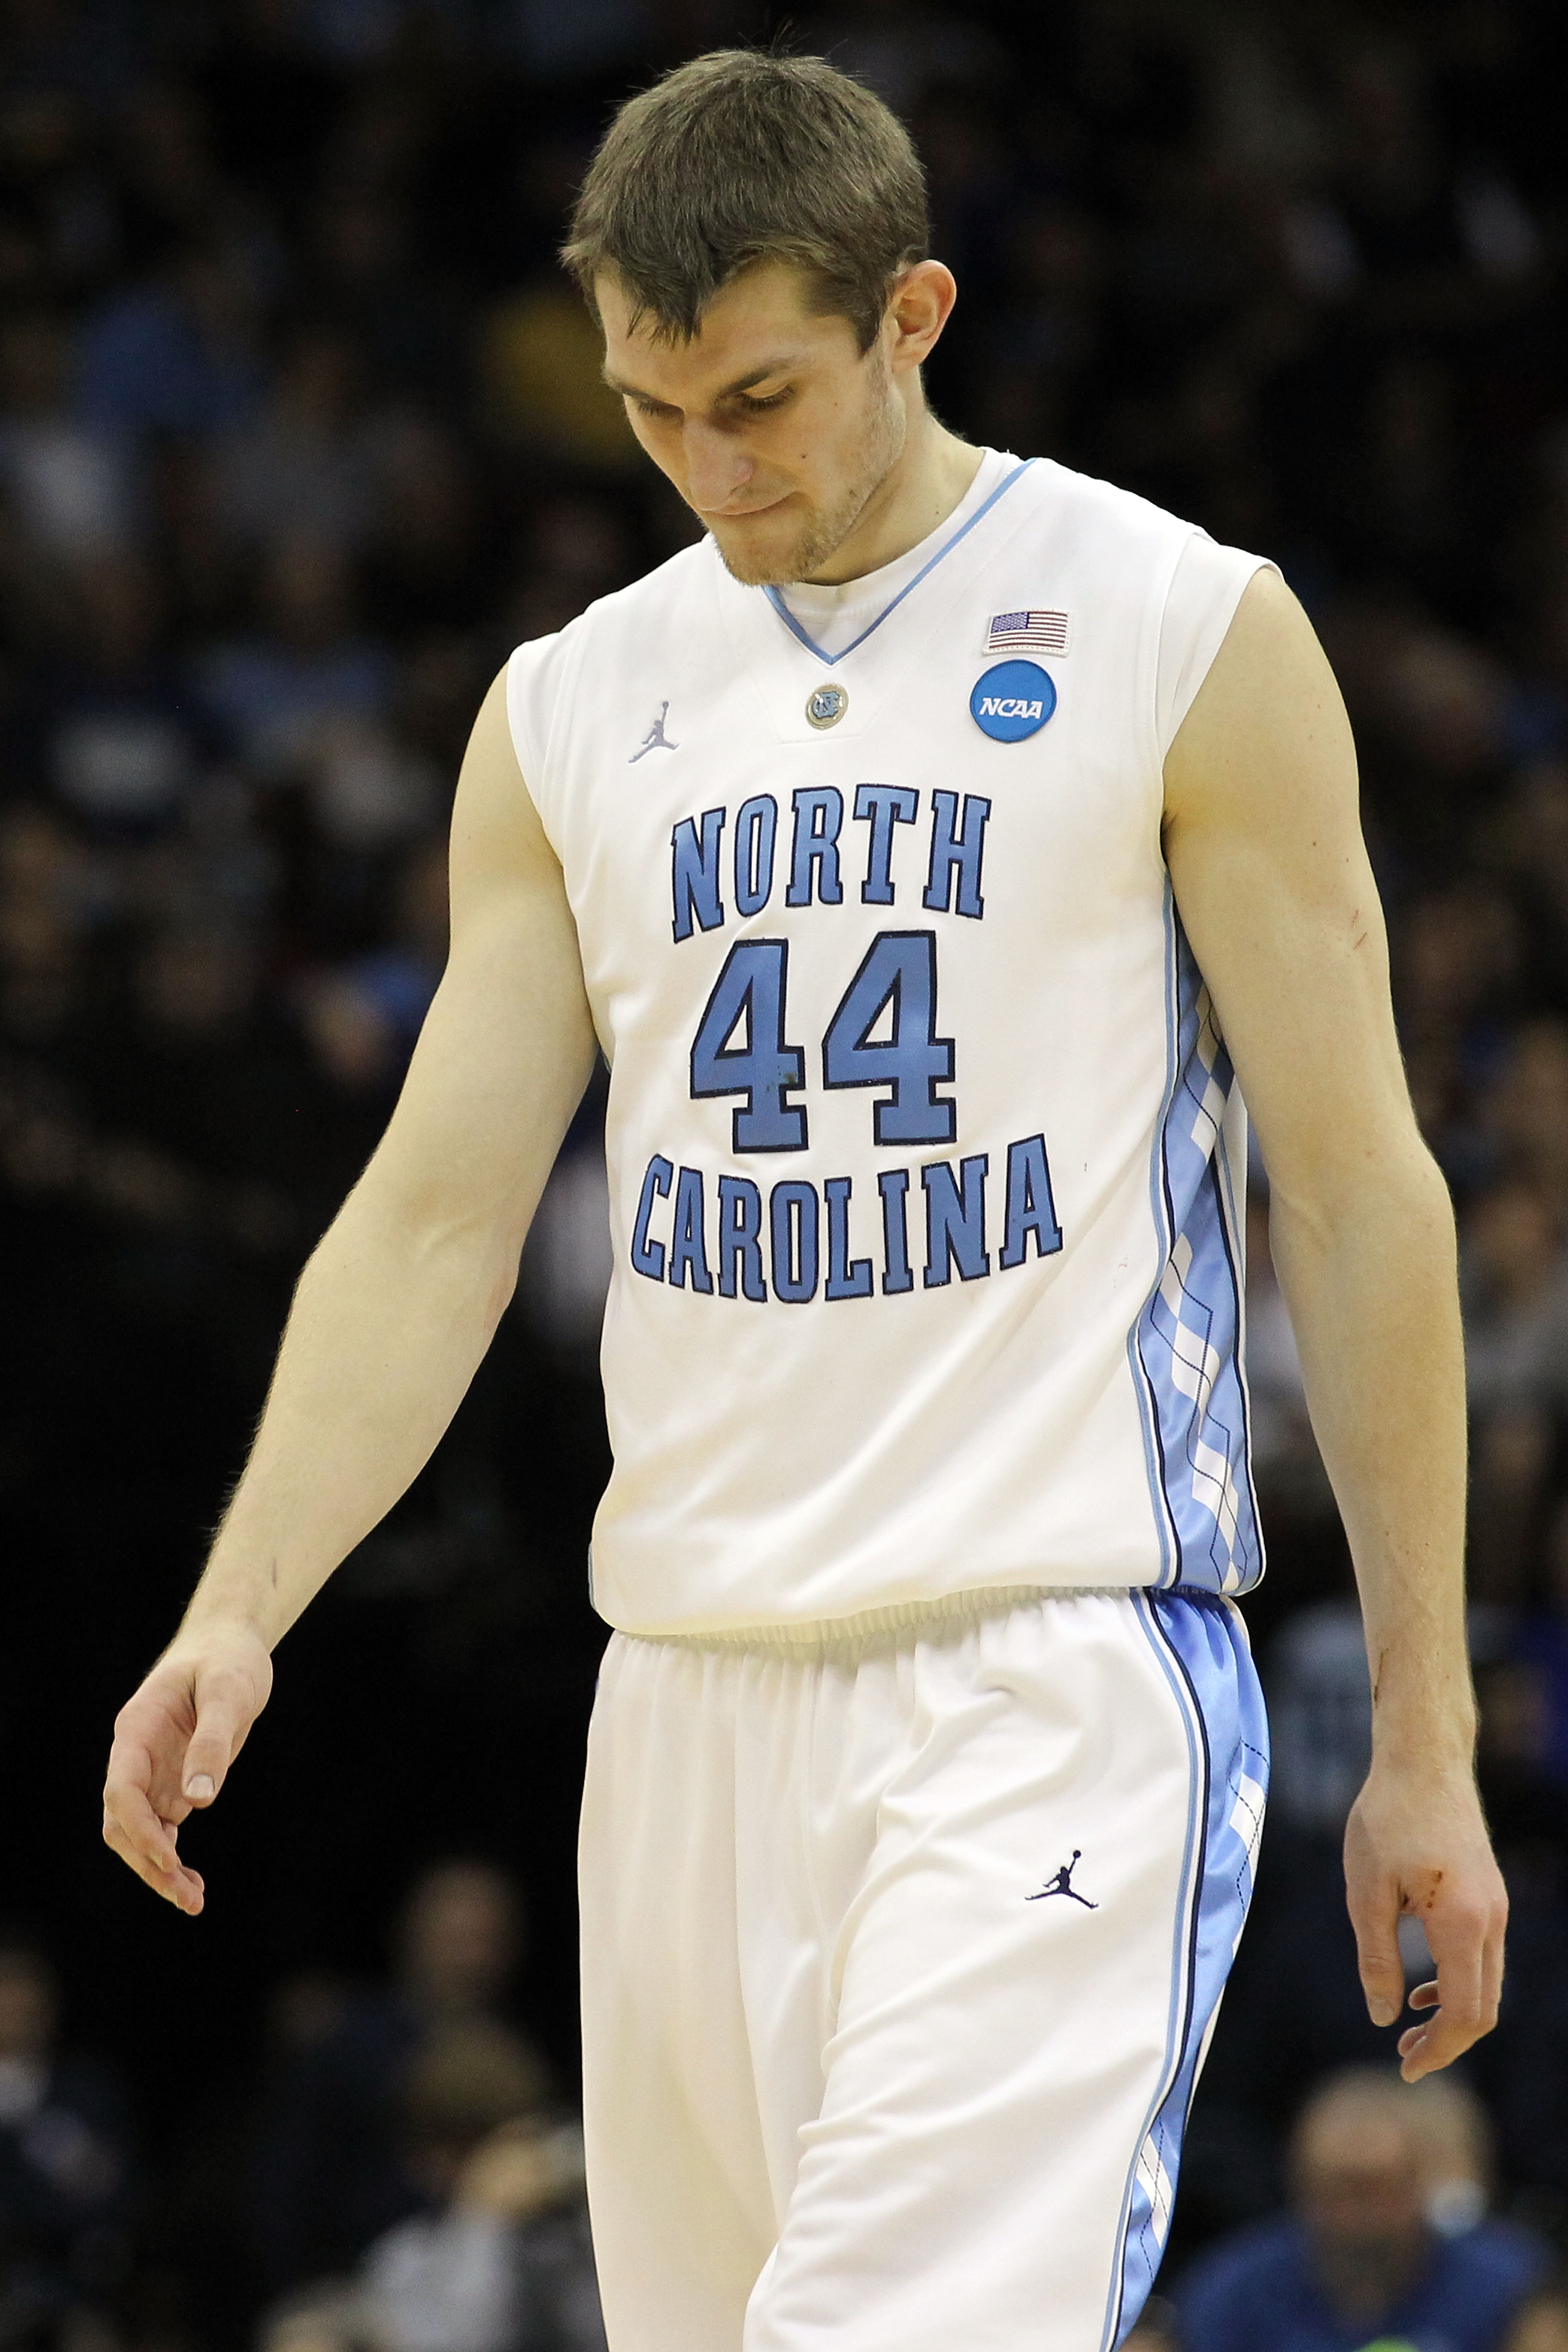 NEWARK, NJ - MARCH 27:  Tyler Zeller #44 of the North Carolina Tar Heels walks on court during the first half of the game against the Kentucky Wildcats in the east regional final of the 2011 NCAA men's basketball tournament at Prudential Center on March 2